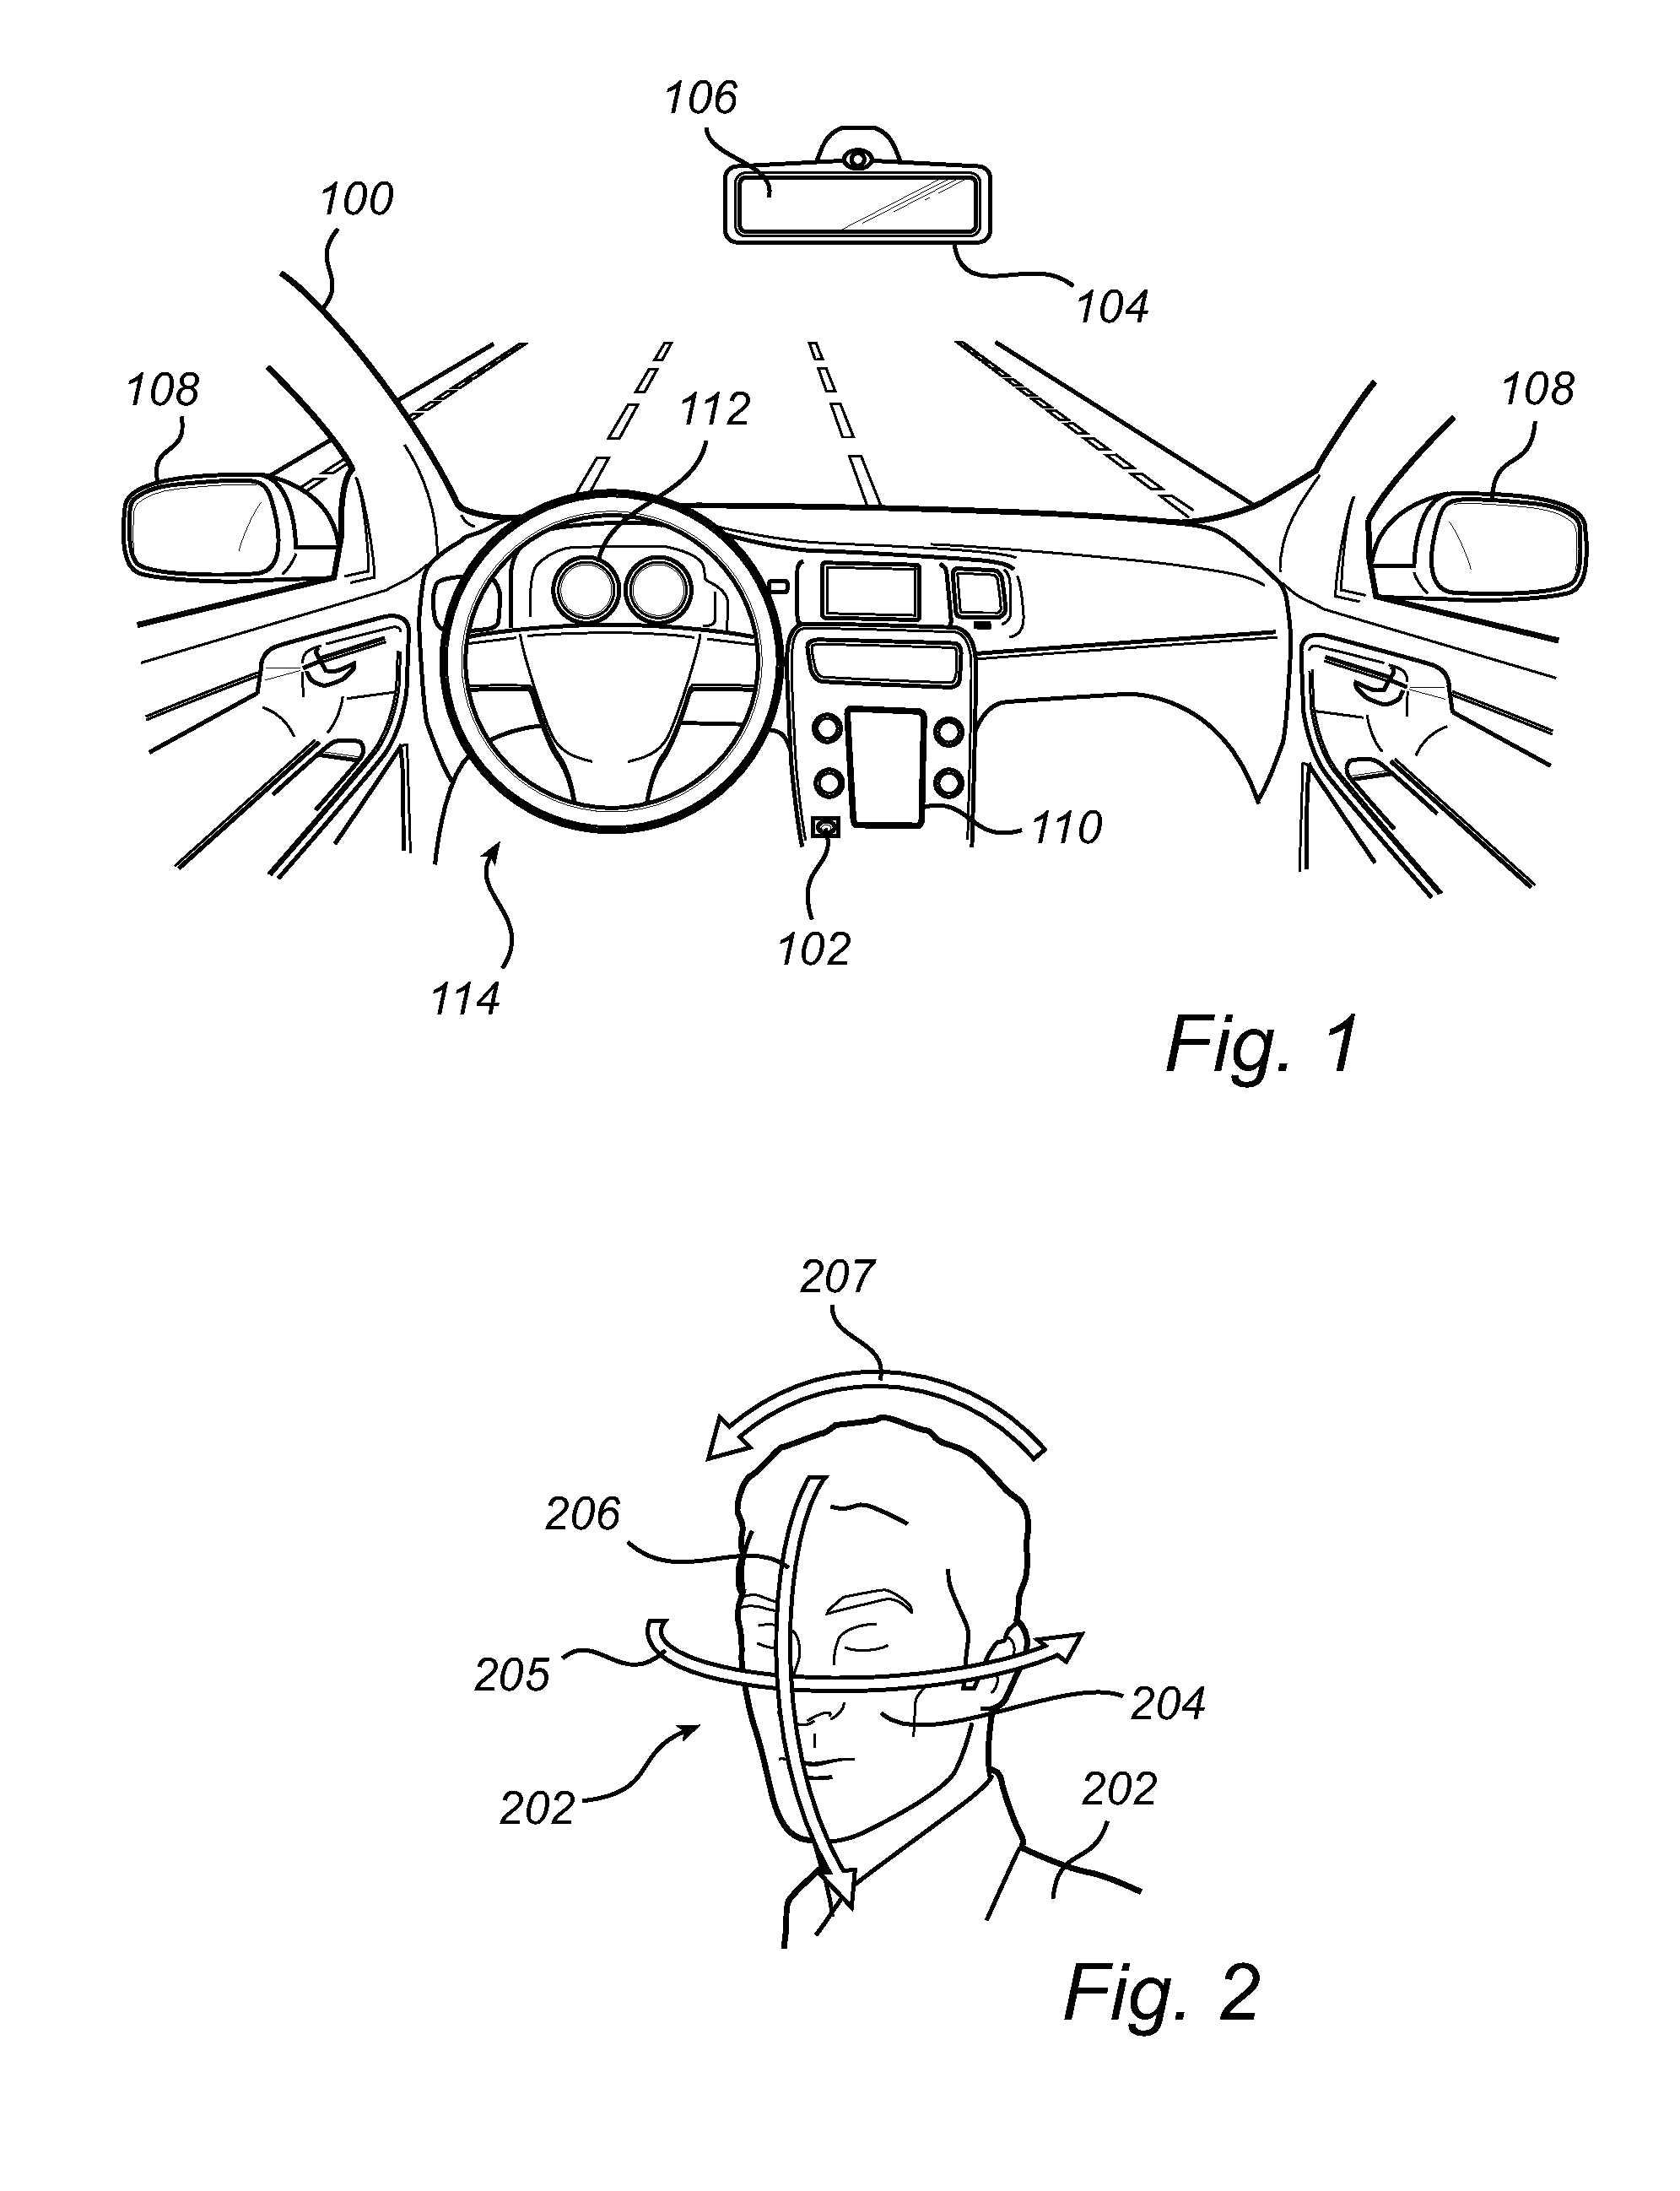 Method for classification of eye closures